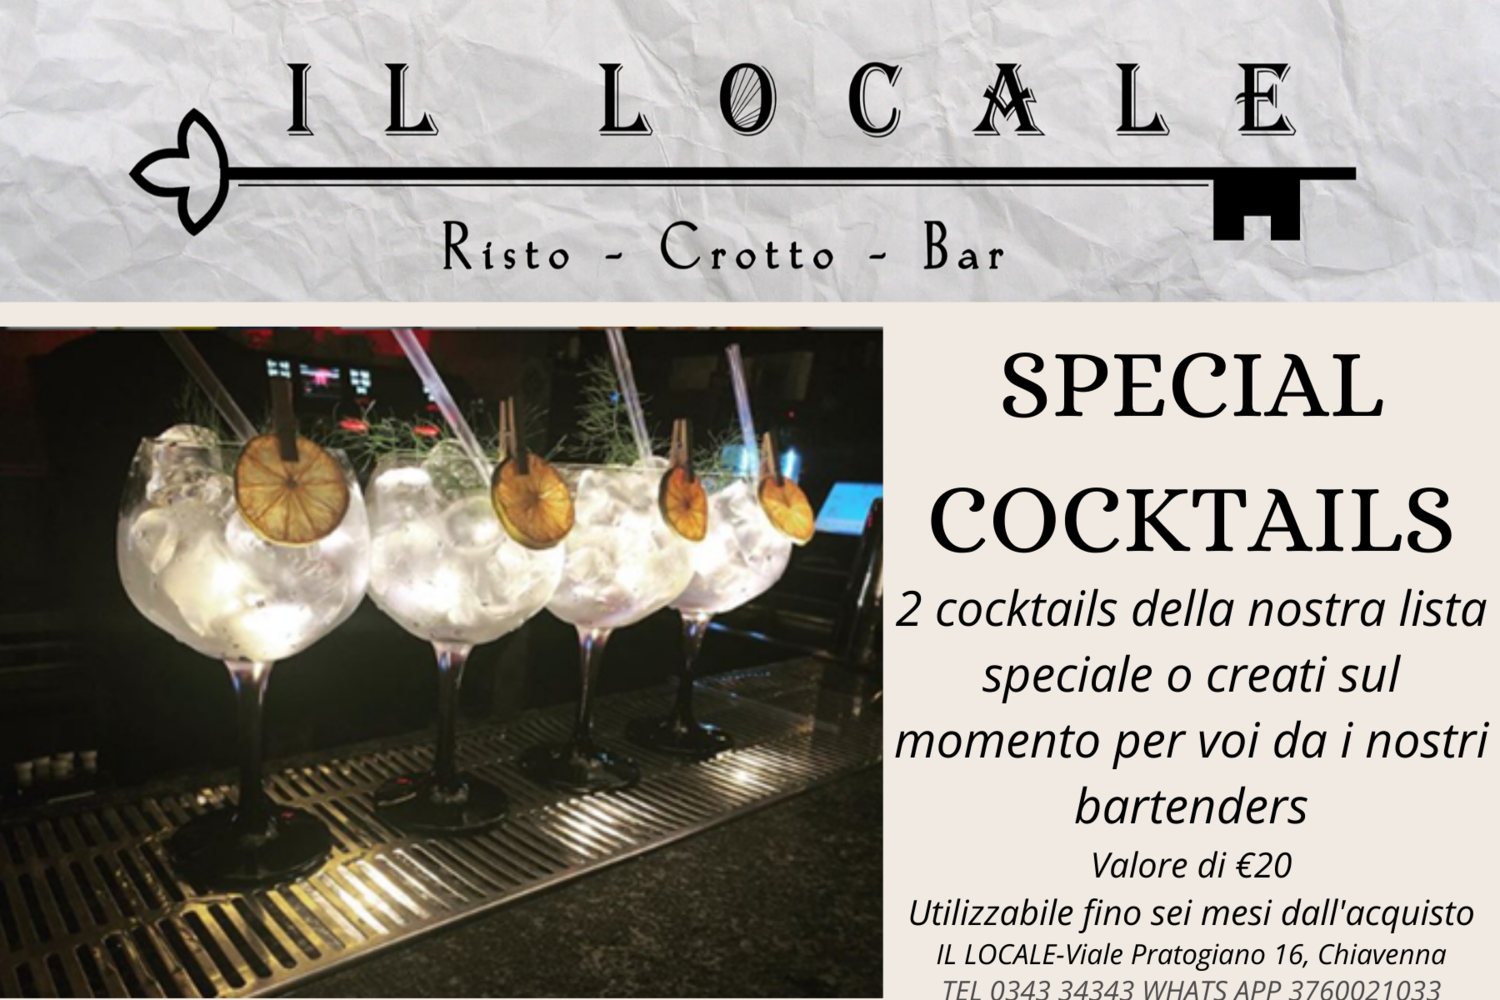 SPECIAL COCKTAILS